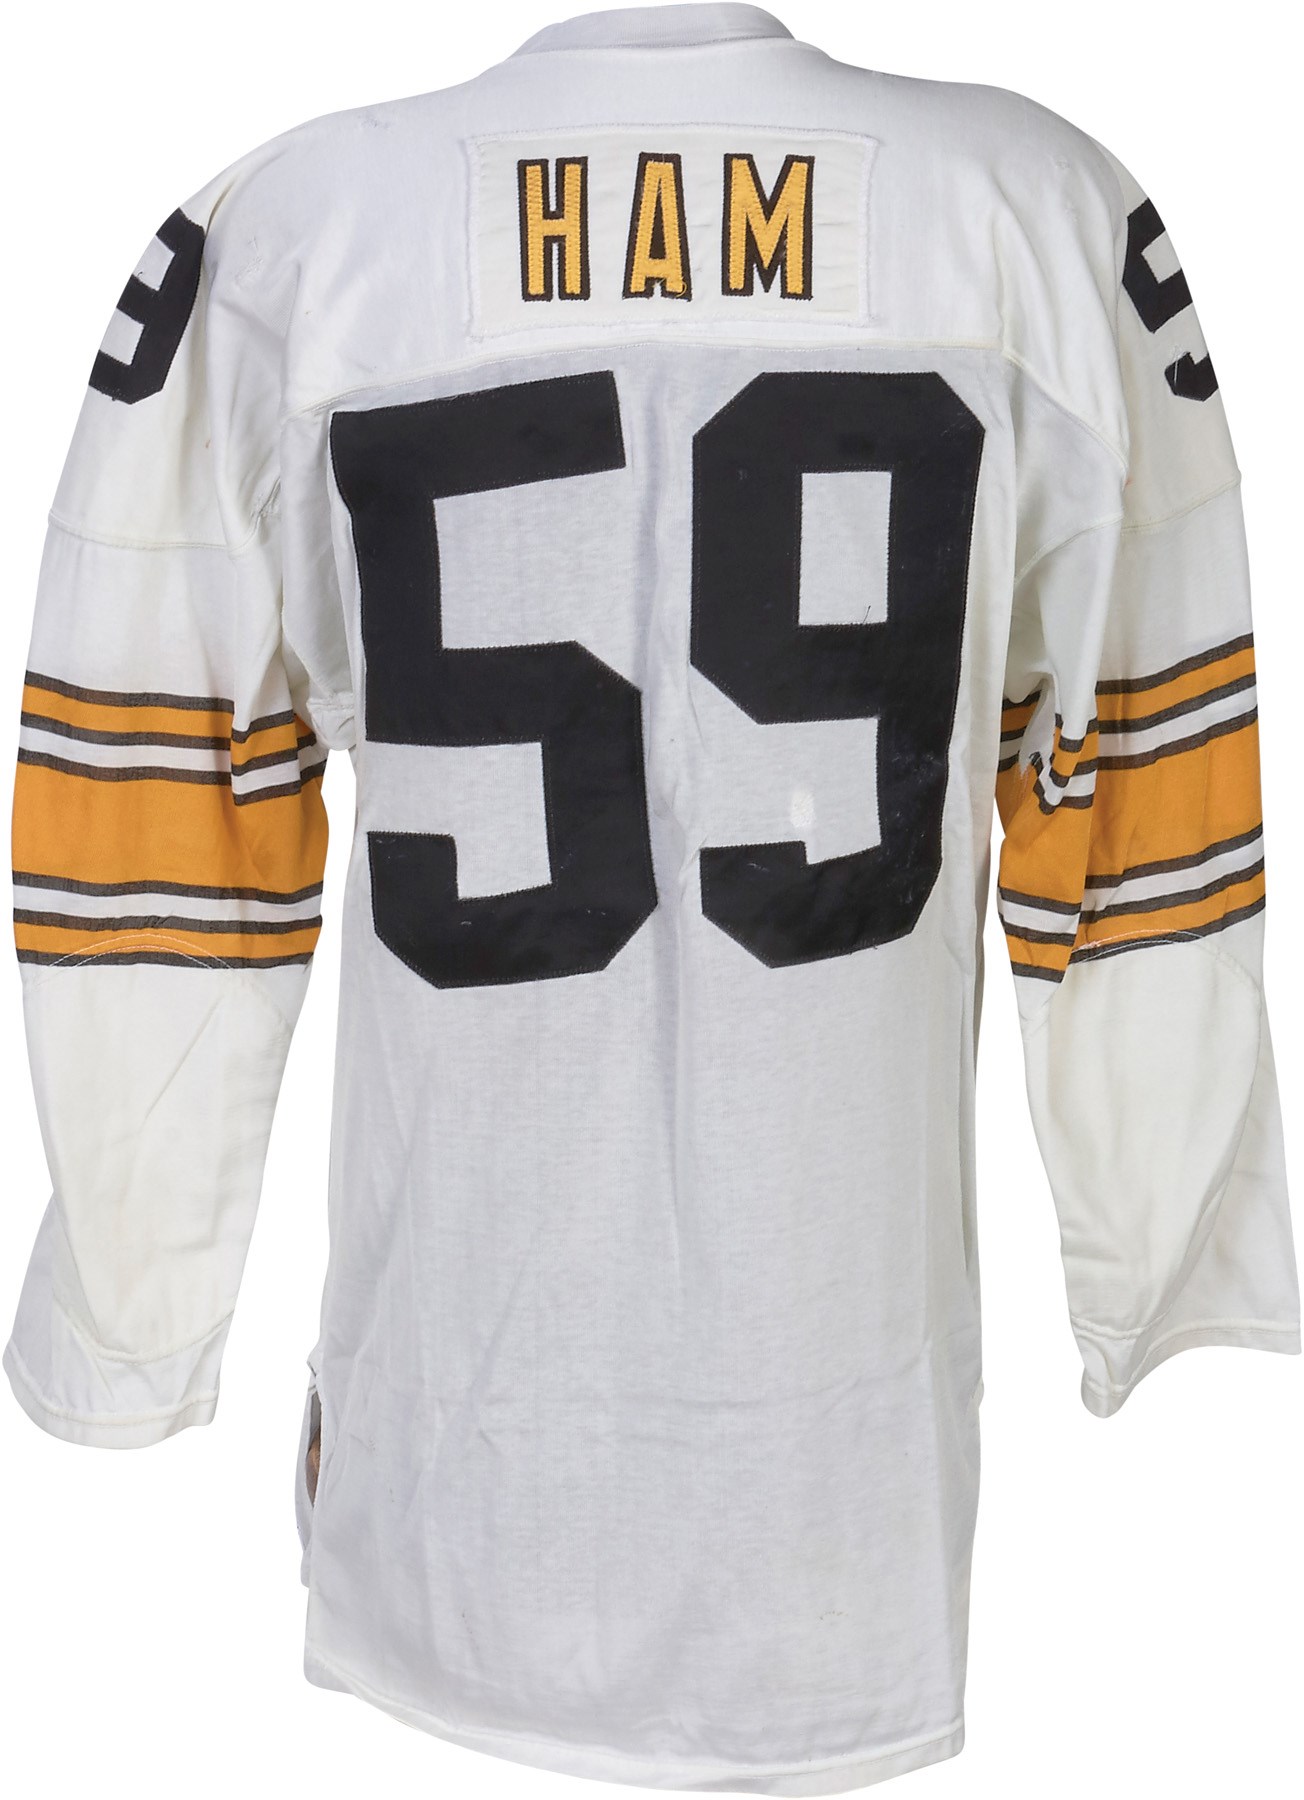 The Pittsburgh Steelers Game Worn Jersey Archive - 1982 Jack Ham Pittsburgh Steelers Game Worn Jersey (Photo-Matched)